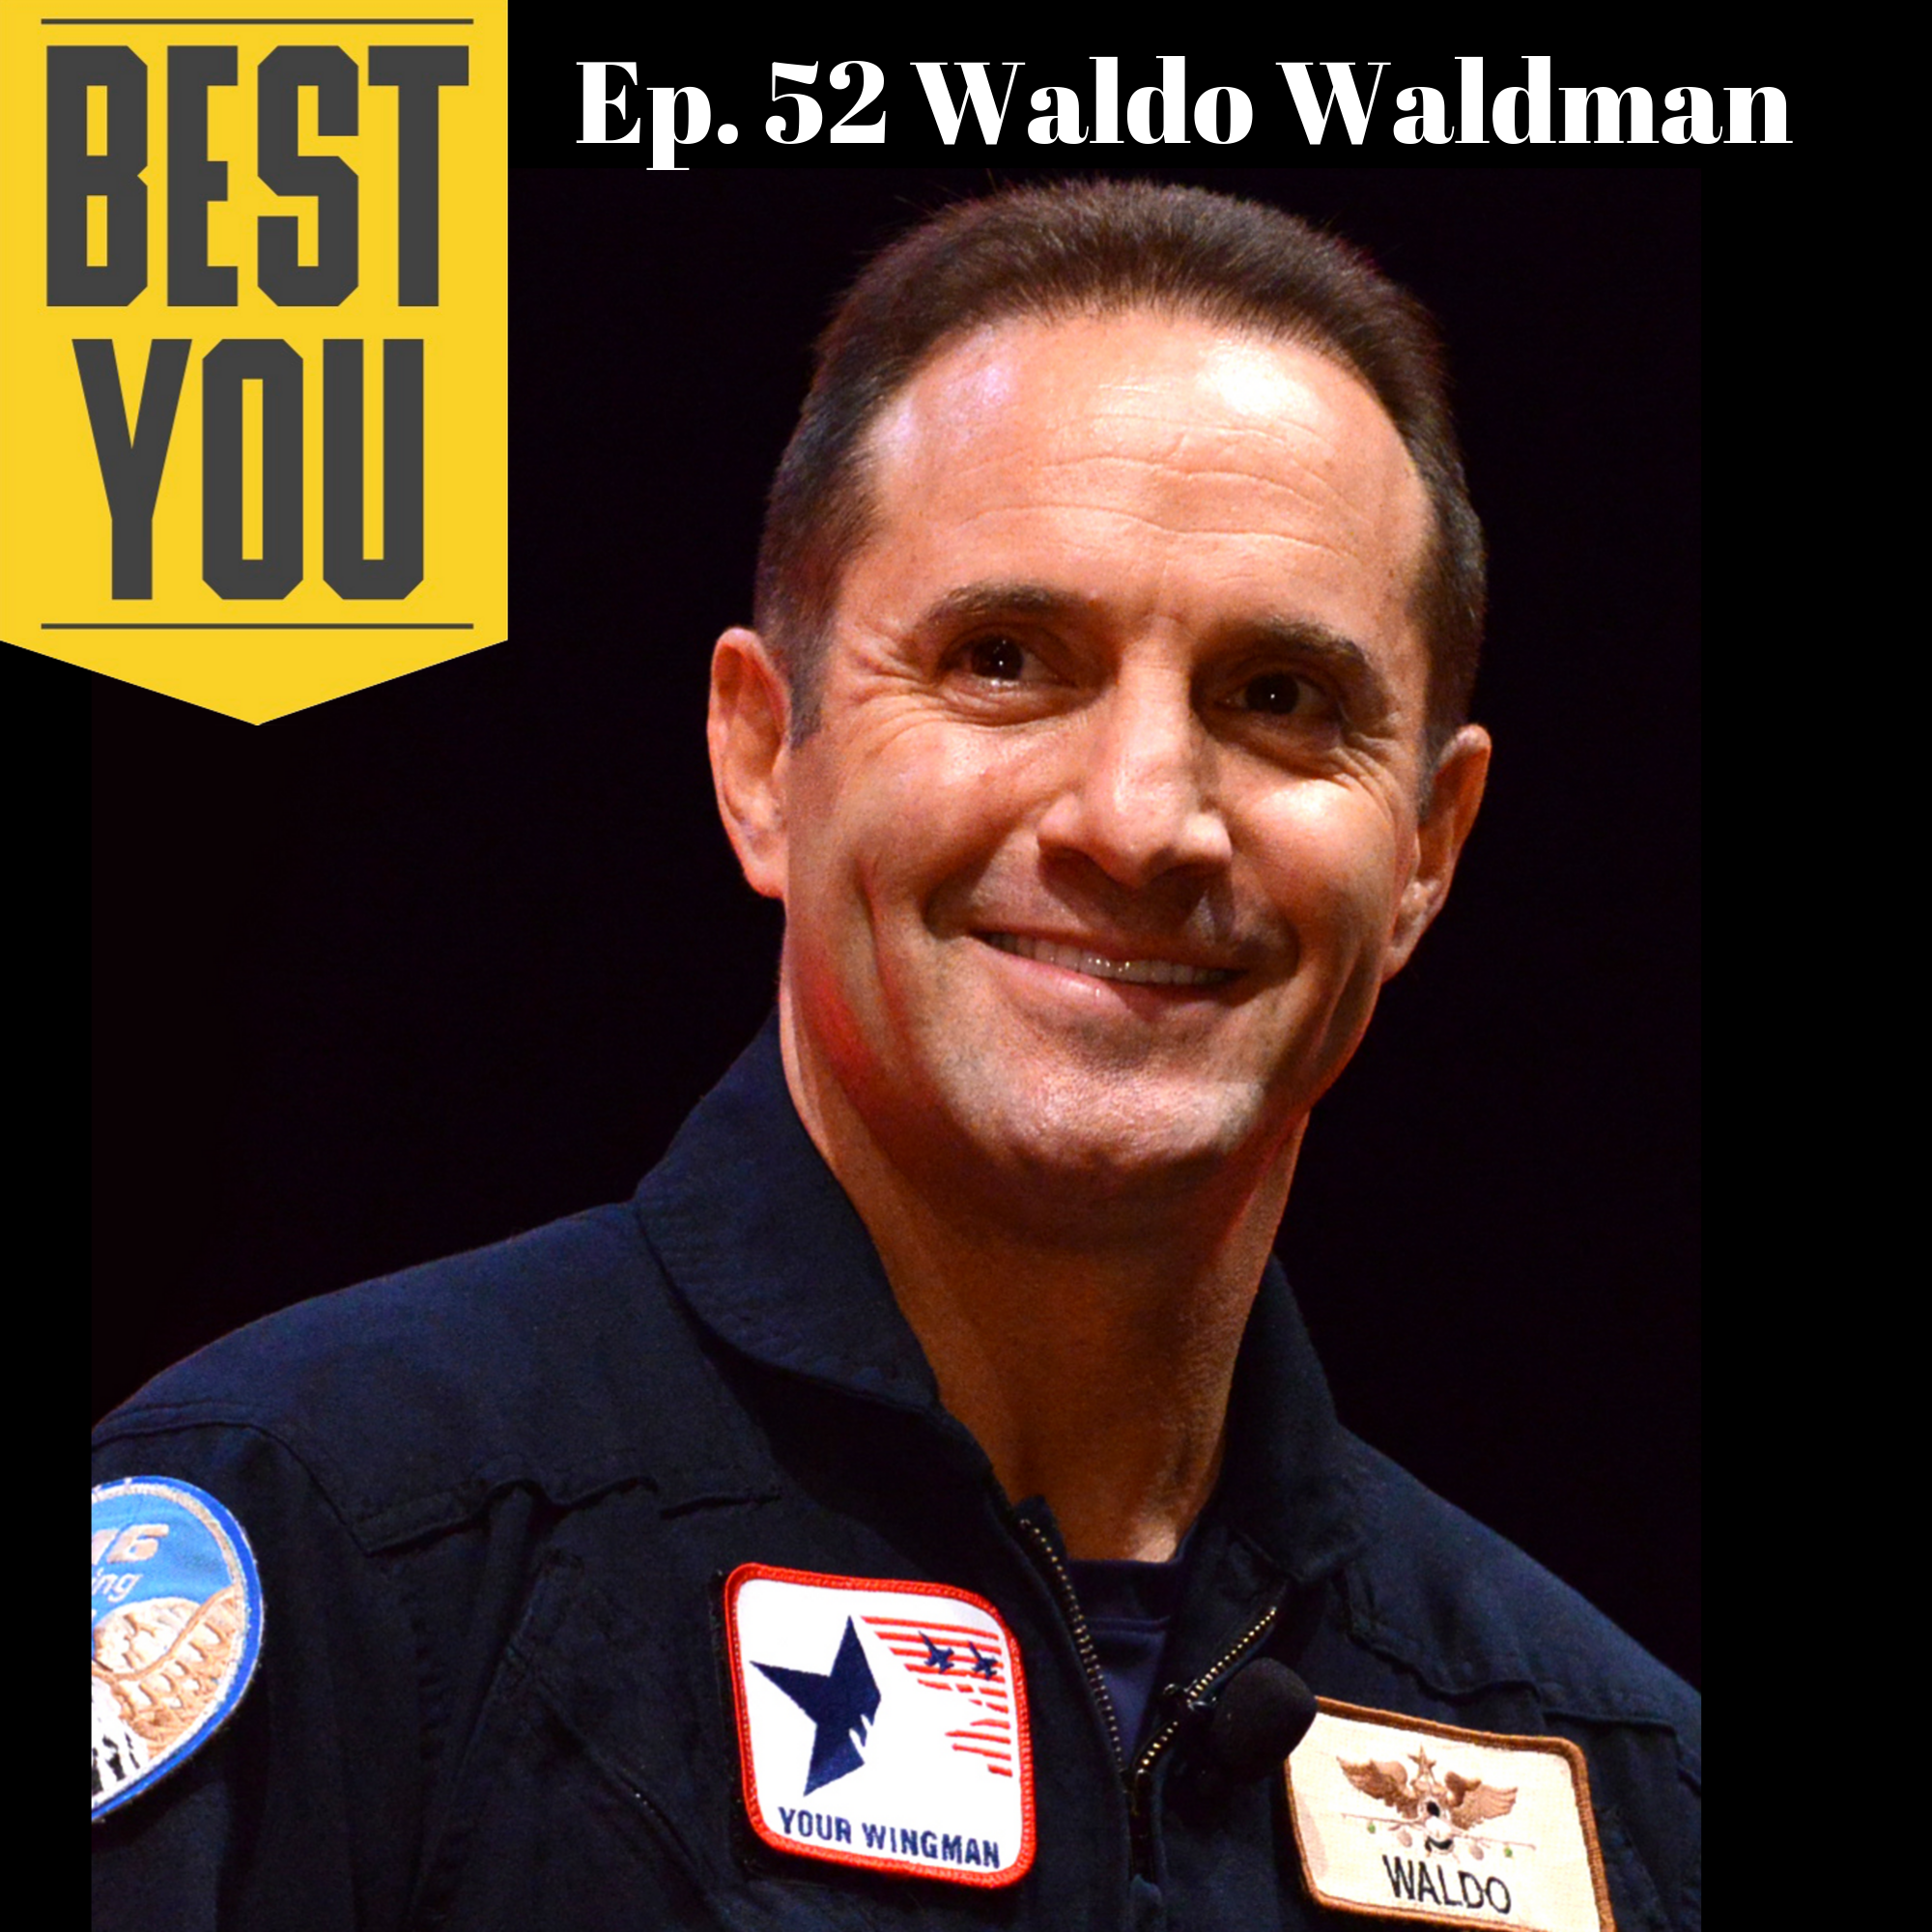 Ep. 104 Waldo Waldman - How to Prepare and Execute Your Mission